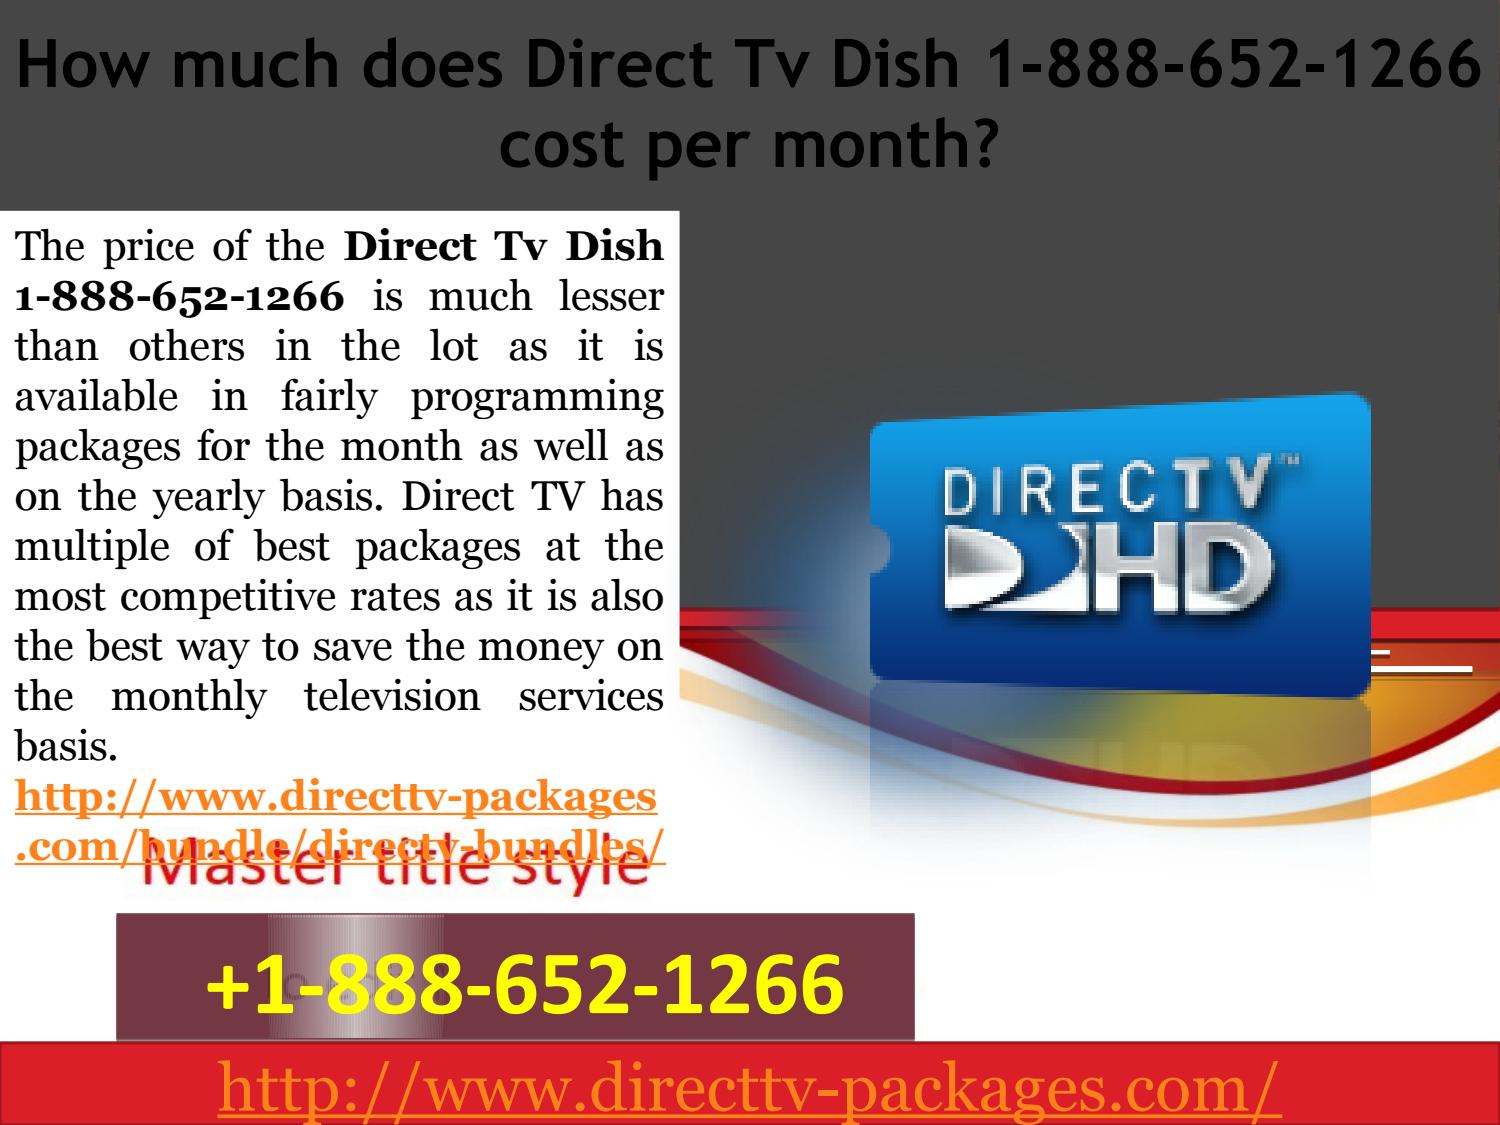 How much does Direct TV Dish 1